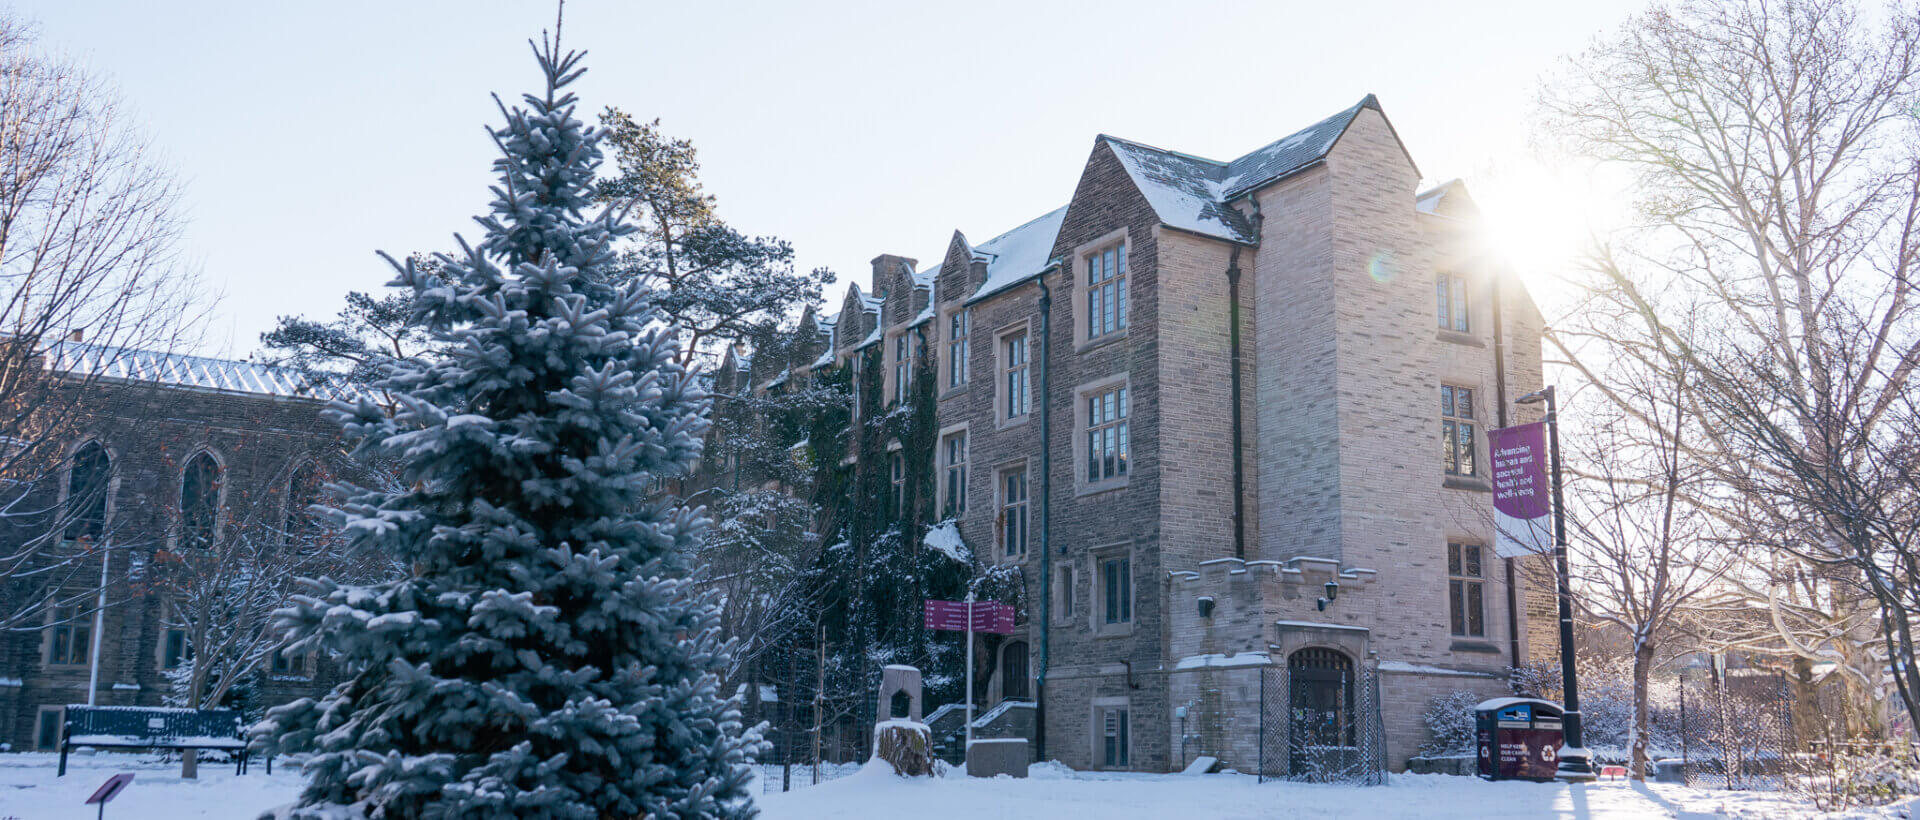 View from behind University Hall in winter.